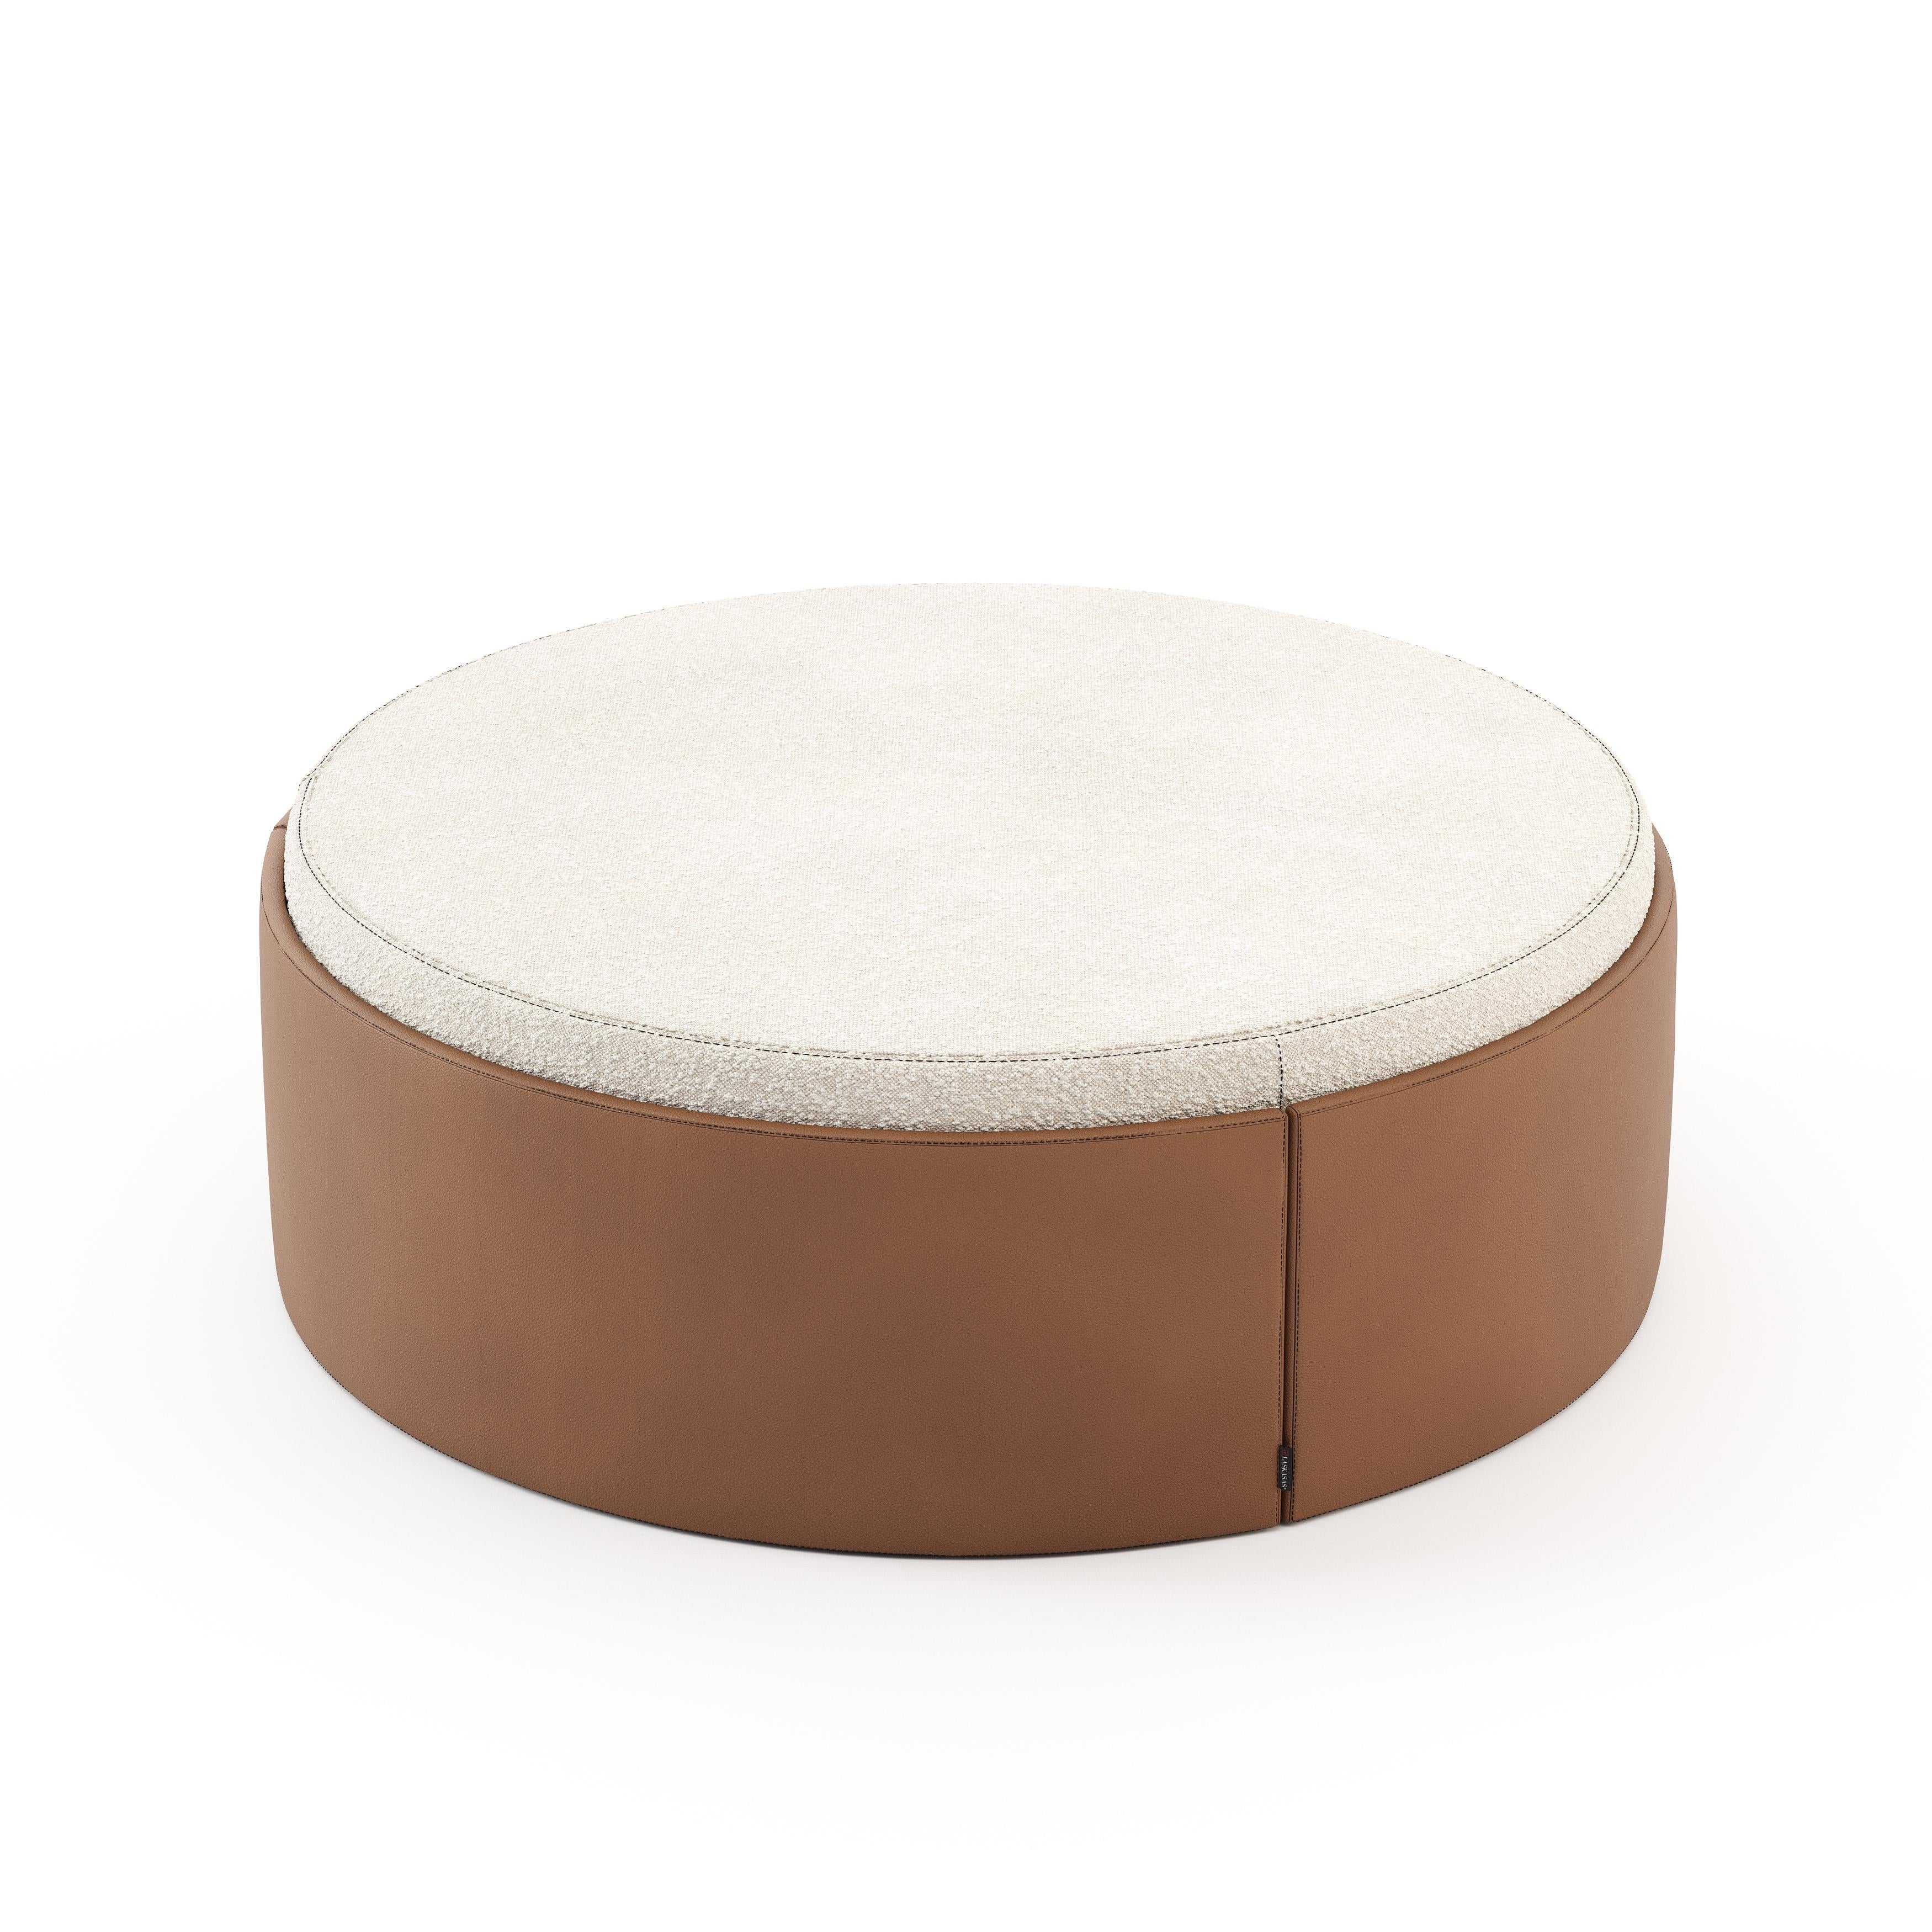 One of life’s little luxuries, Jason pouf has it all. With undeniably good looks and ultimate versatility, you’ll wonder how you managed without it. Perfect for perching, the pouffe is the ideal seat for smaller social spaces where you often have